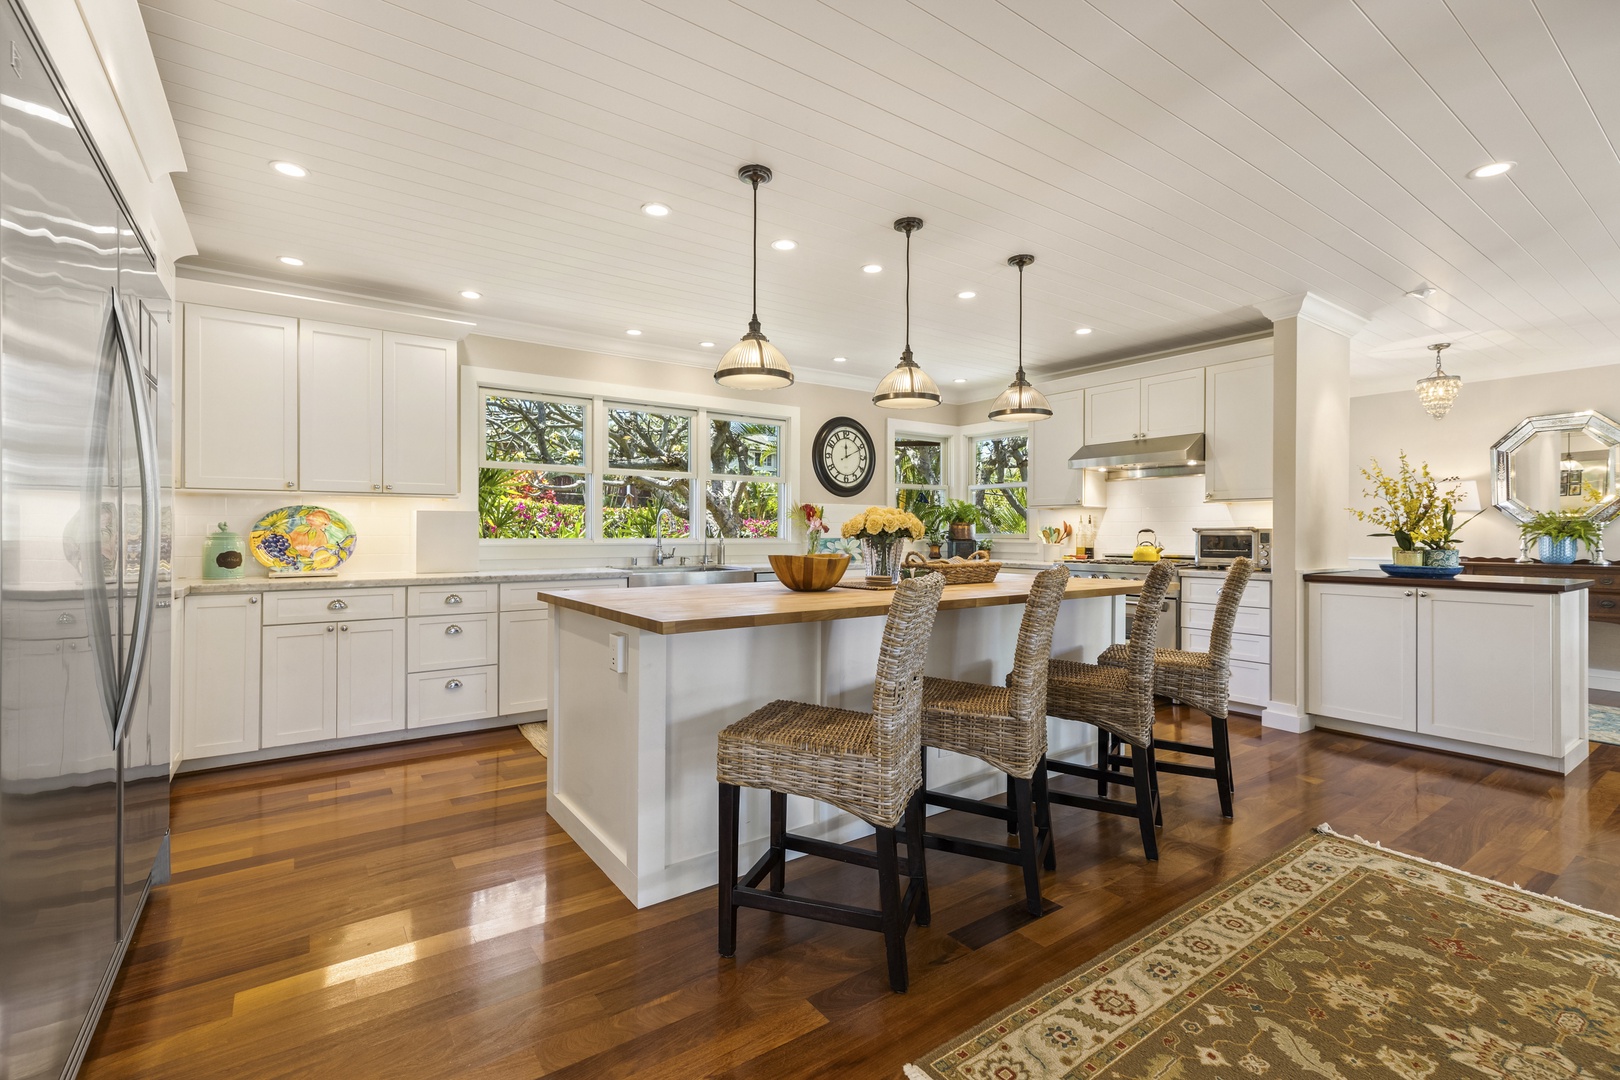 Honolulu Vacation Rentals, Hale Le'ahi* - Large kitchen perfect for cooking gourmet meals and entertaining guests